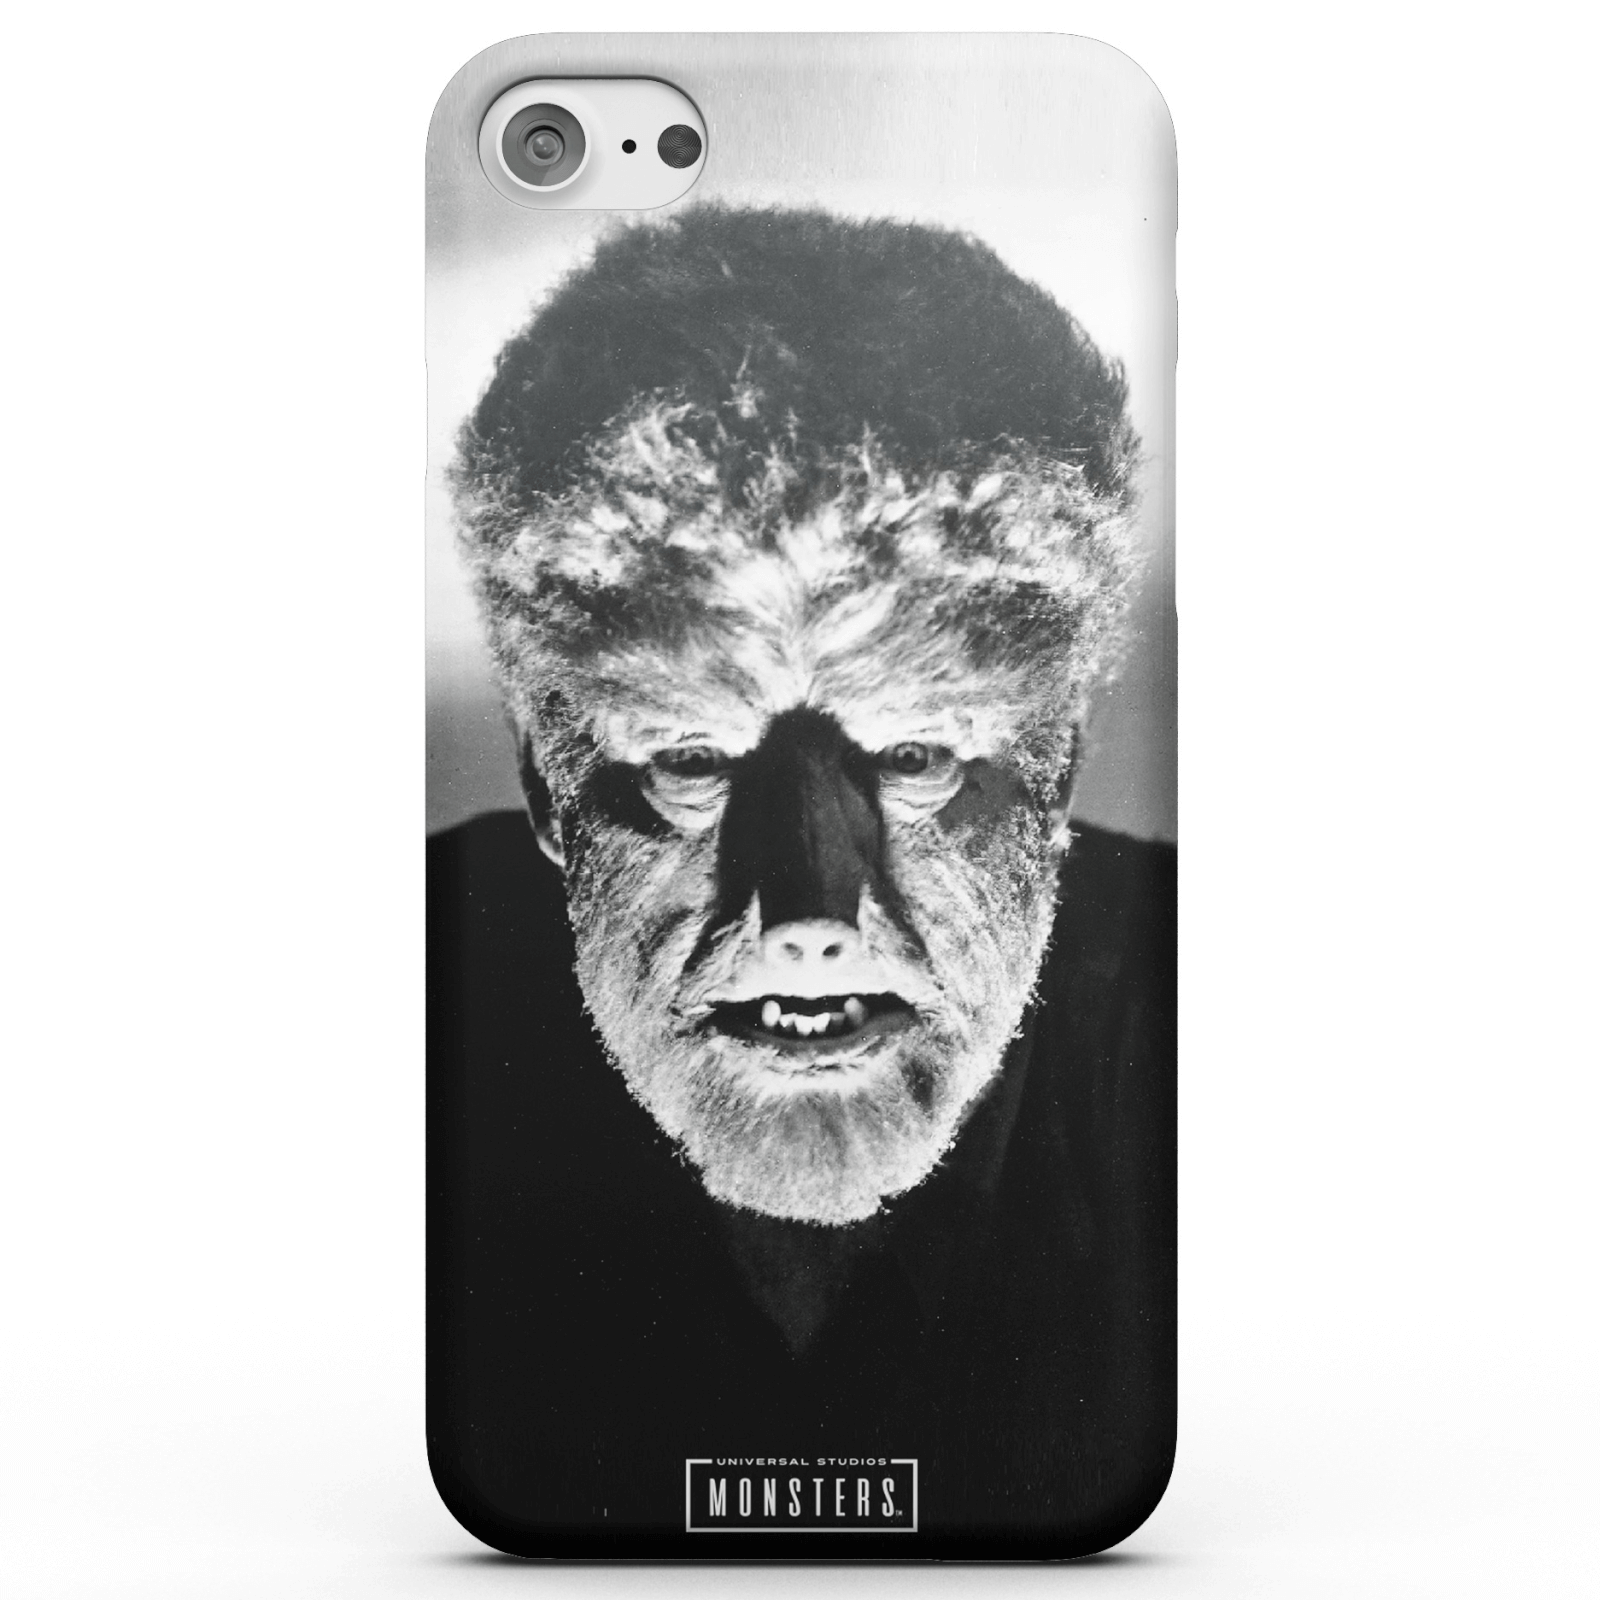 Universal Monsters The Wolfman Classic Phone Case for iPhone and Android - iPhone 6 Plus - Tough Case - Gloss